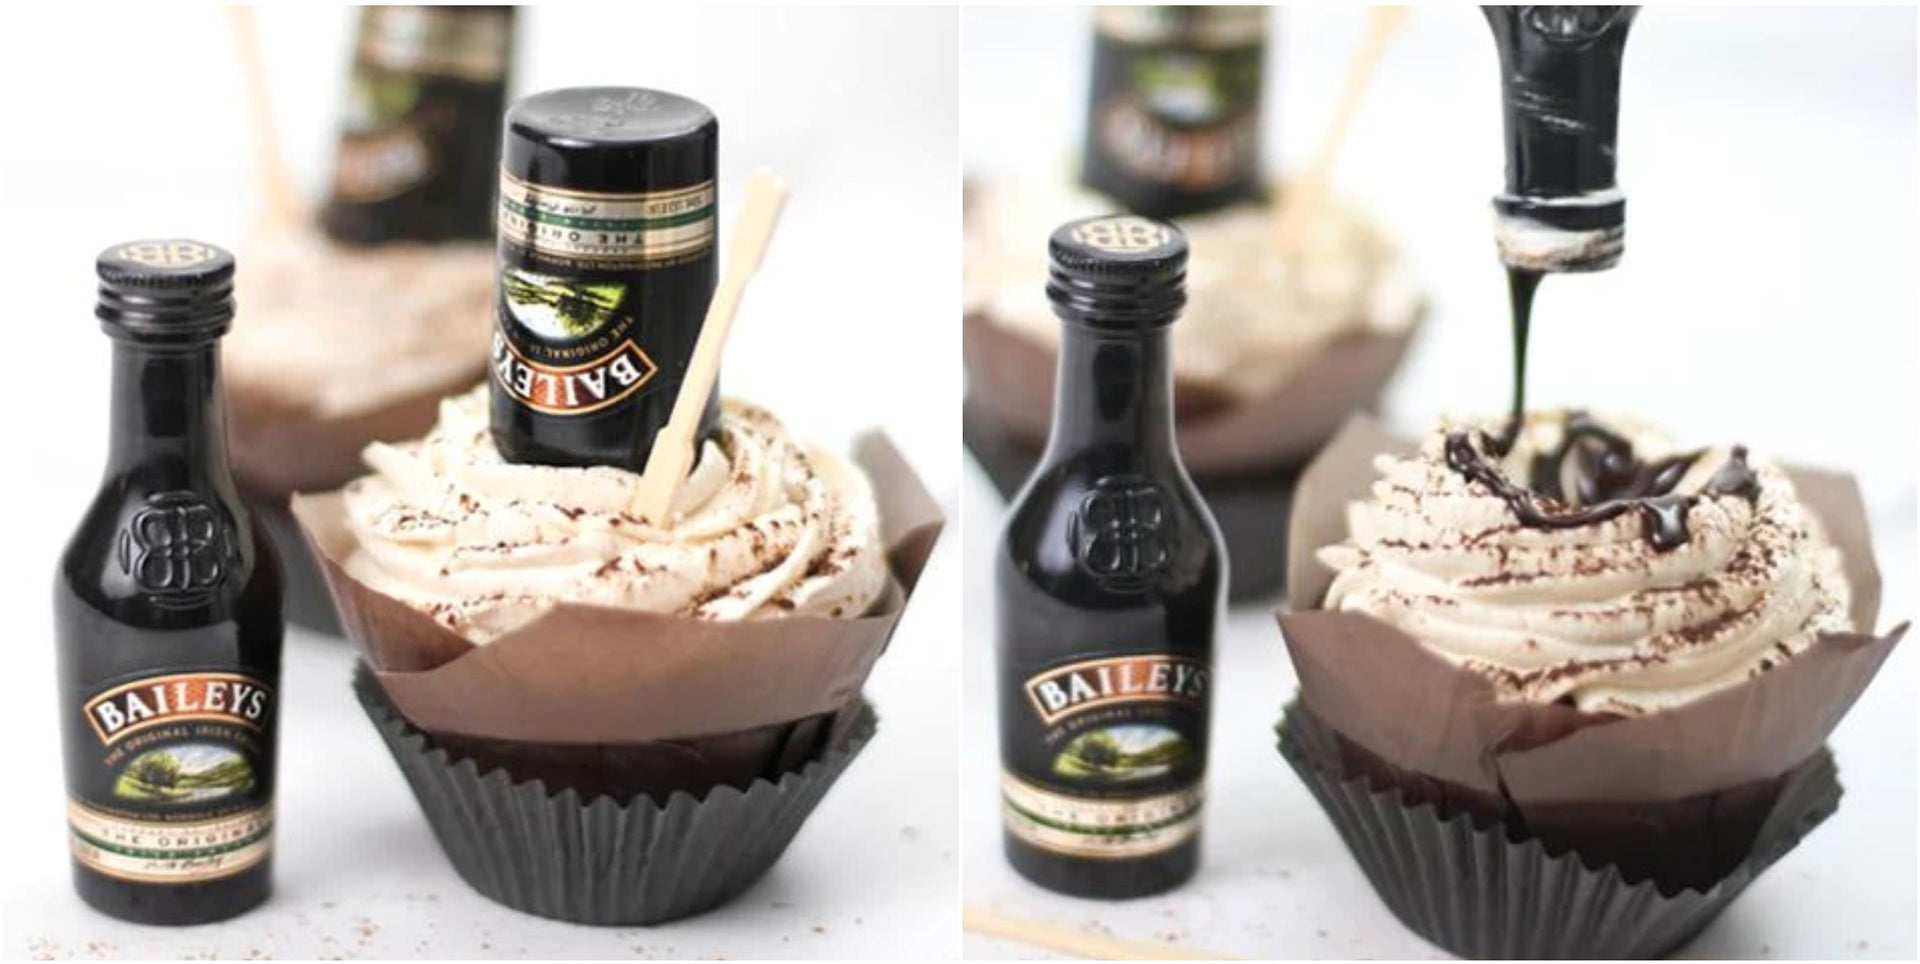 A Touch of Irish Magic: Bailey's Cupcakes – The Ultimate St. Patrick's Day Treat